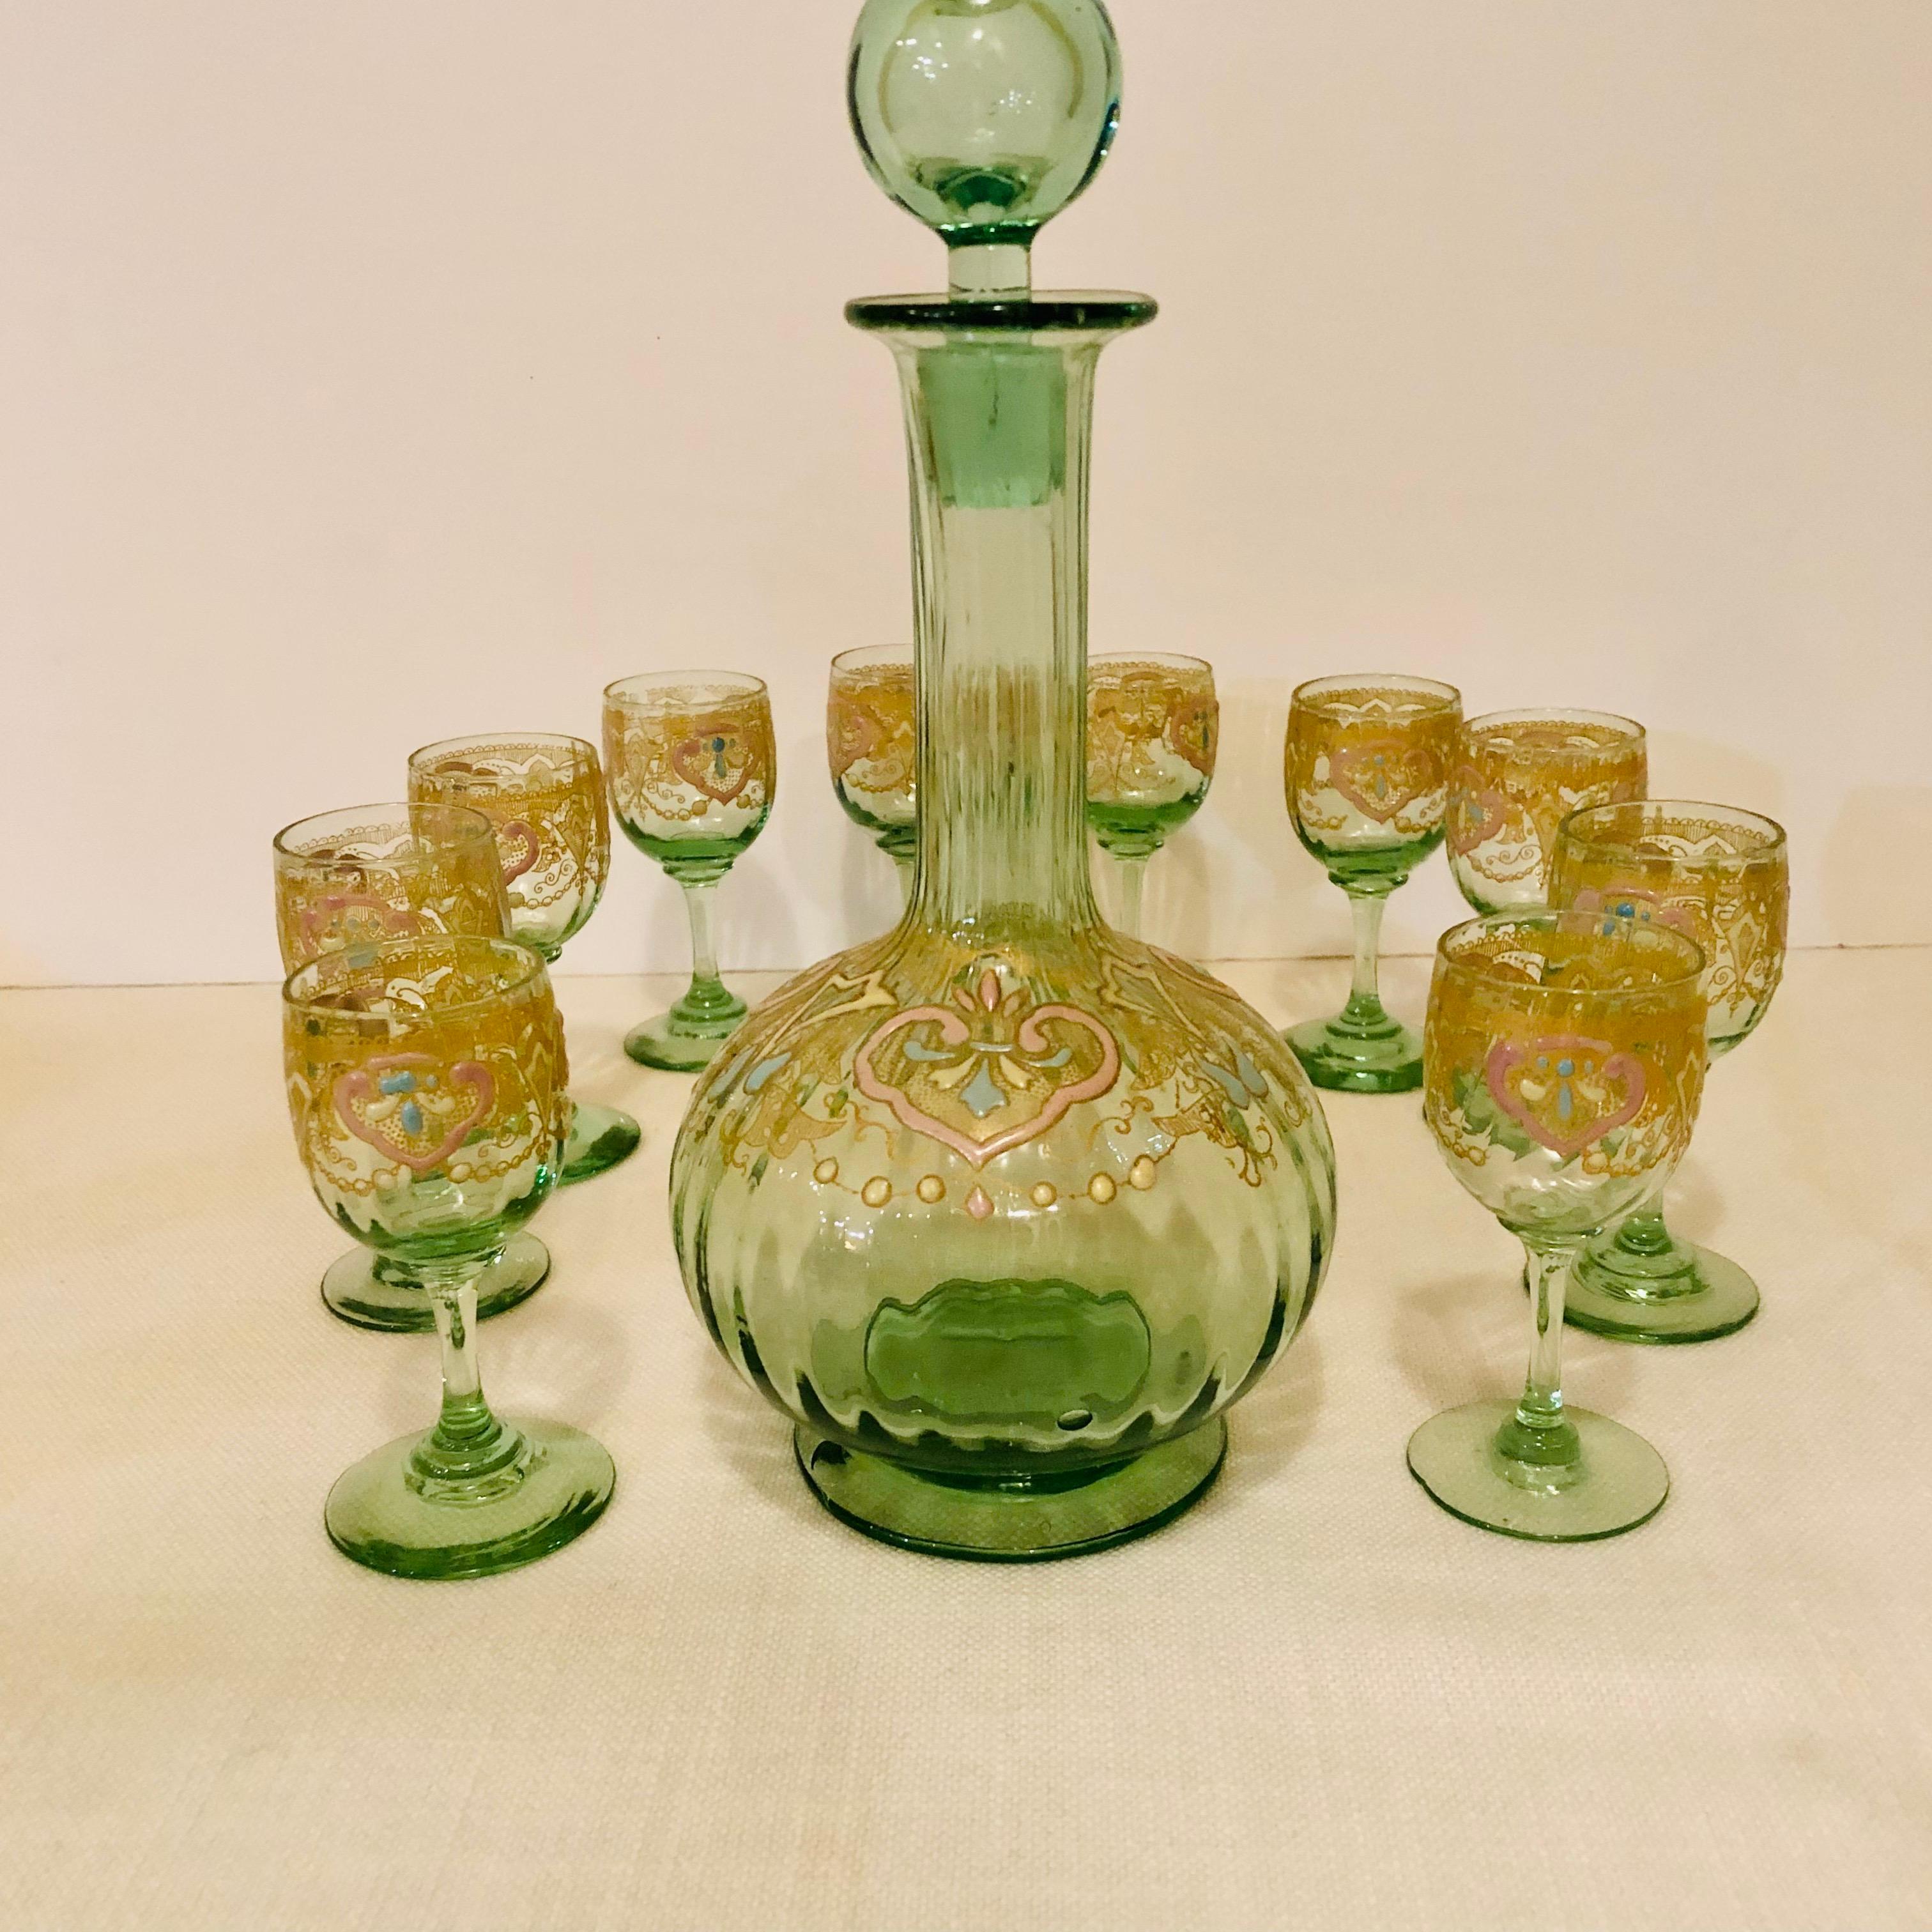 Venetian Decanter With Ten Venetian Cordial Glasses With Colorful Enamel Accents 7